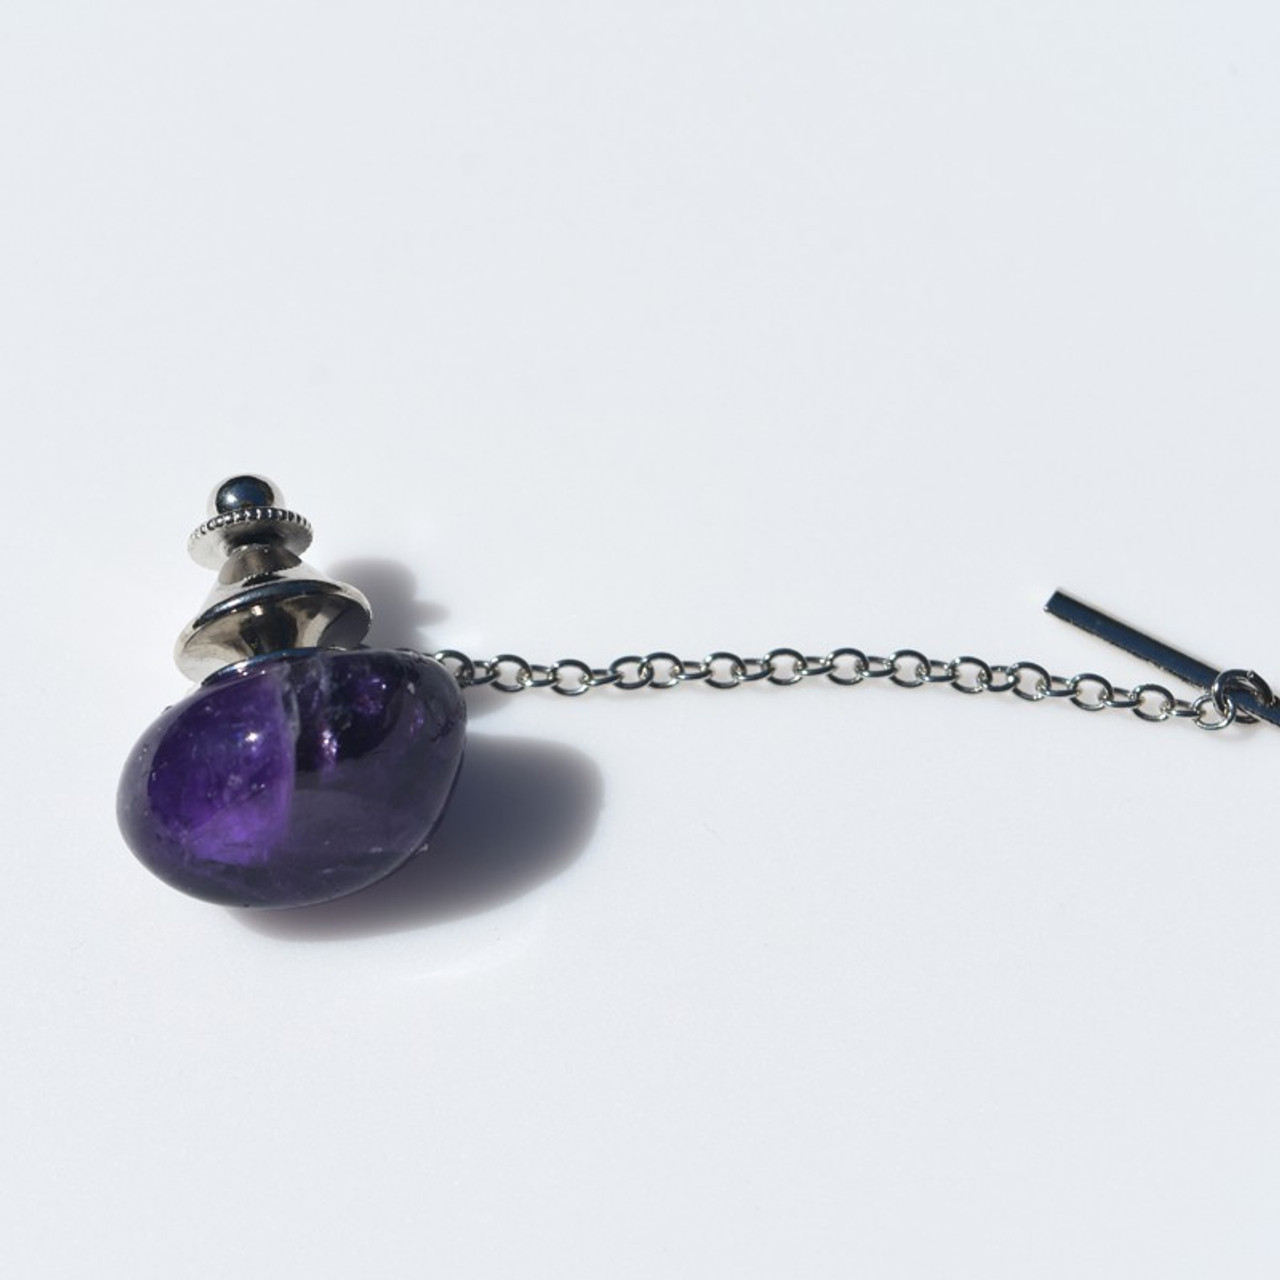 Amethyst Stone Tie Tack - Quantity of 1 - Made to Order